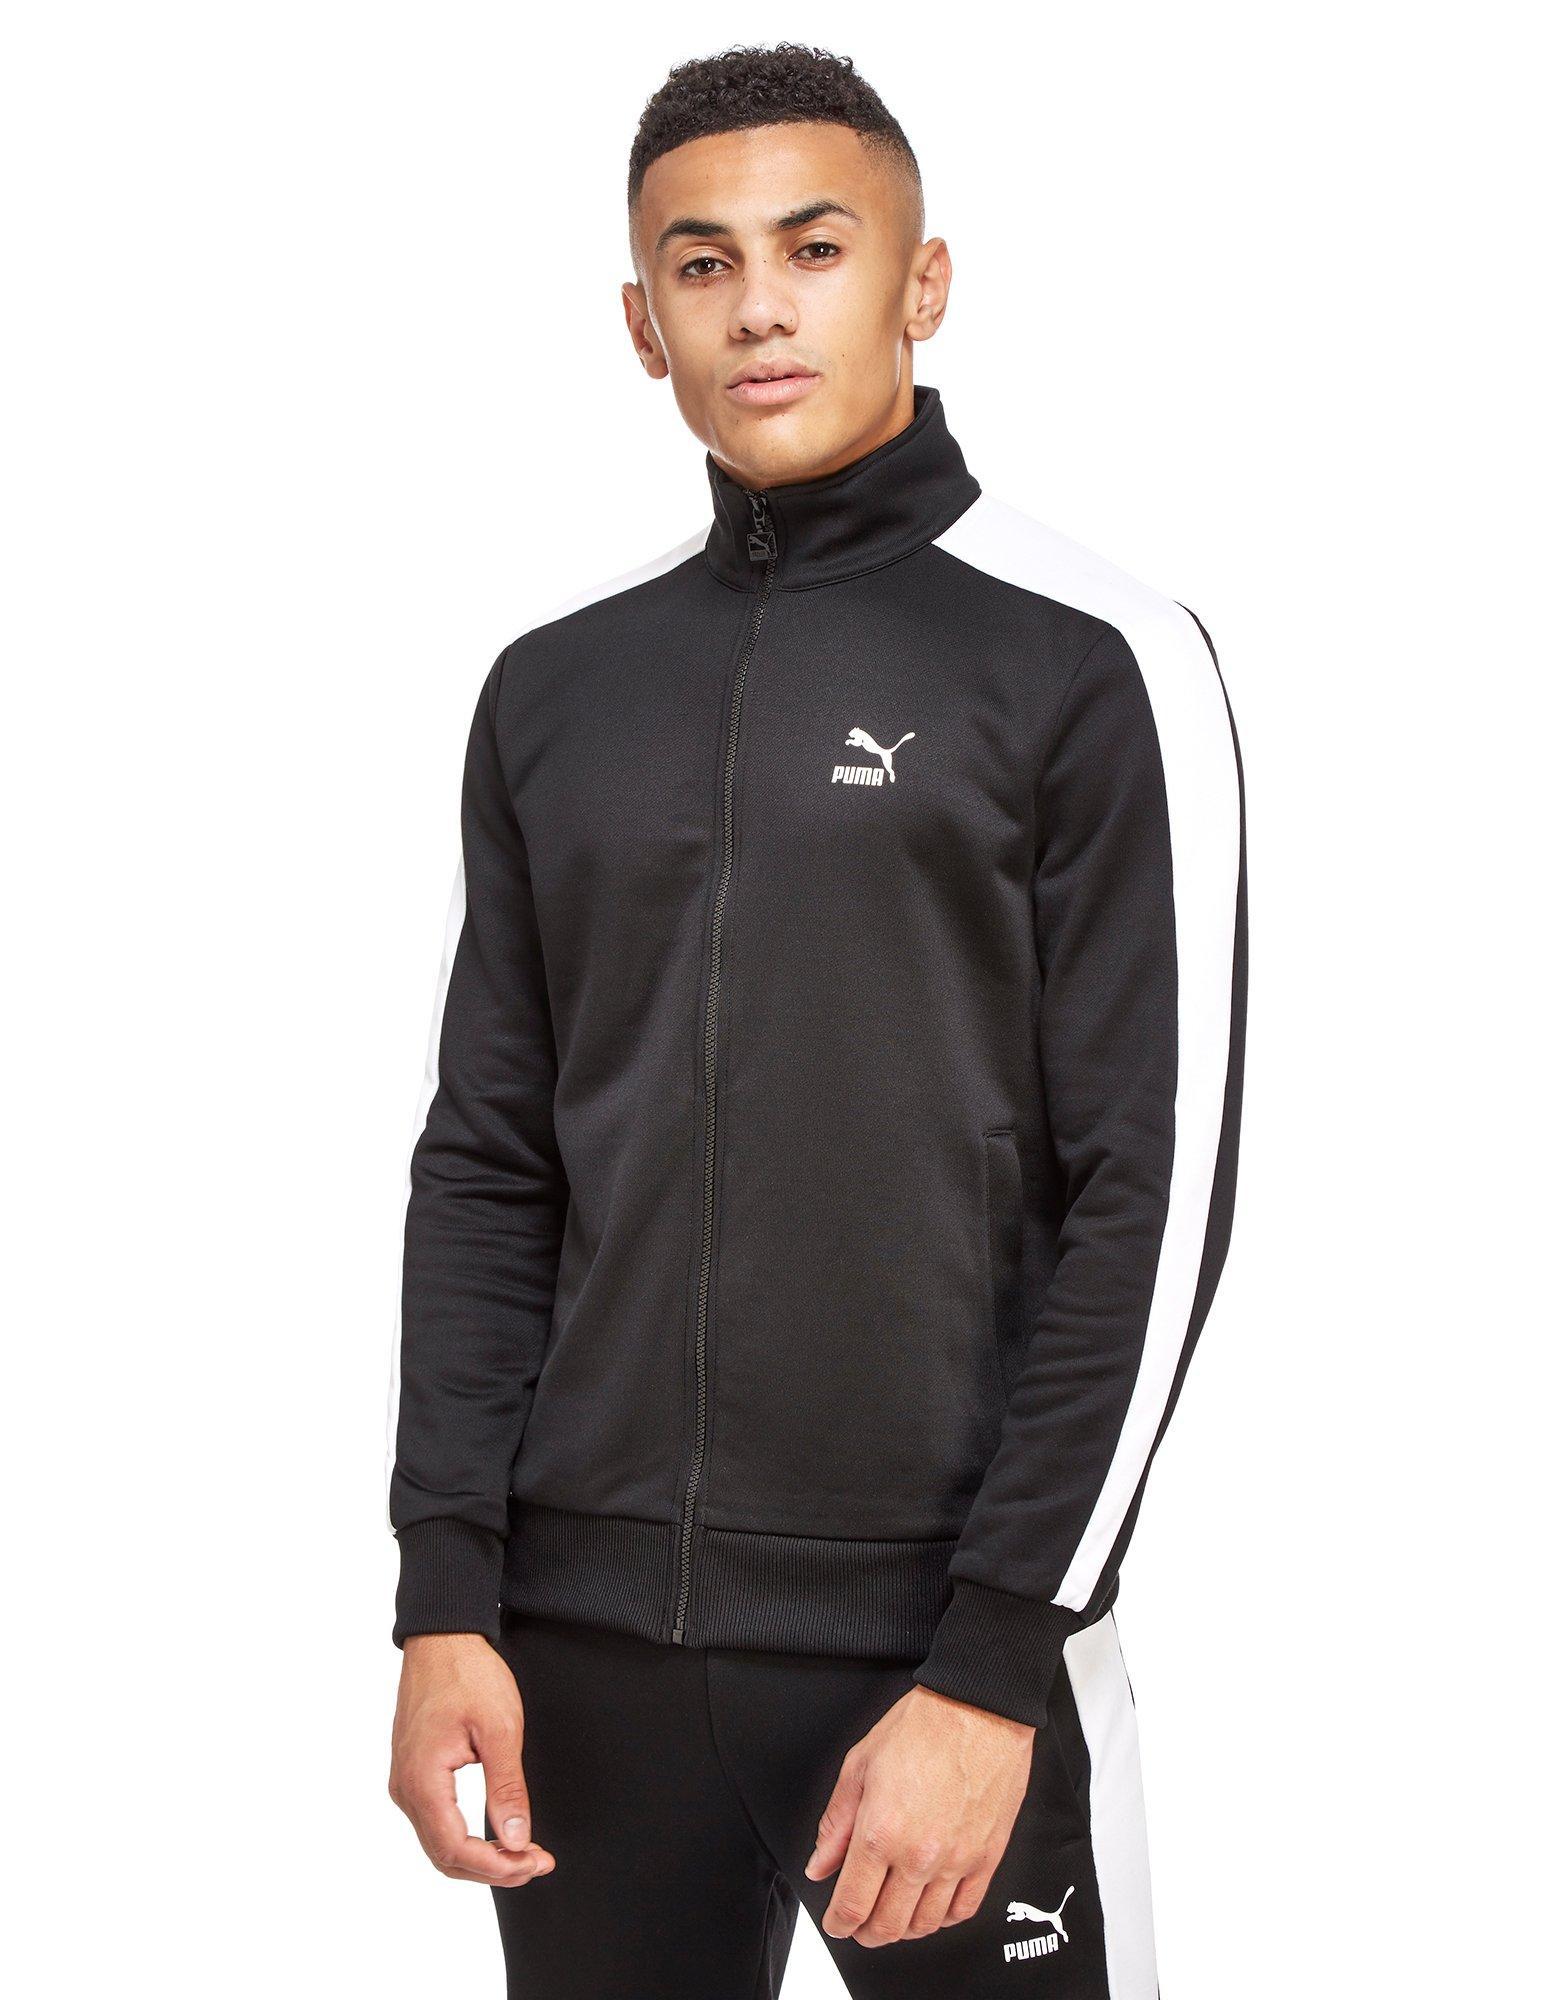 PUMA Cotton Archive T7 Tracksuit Top in Black for Men - Lyst